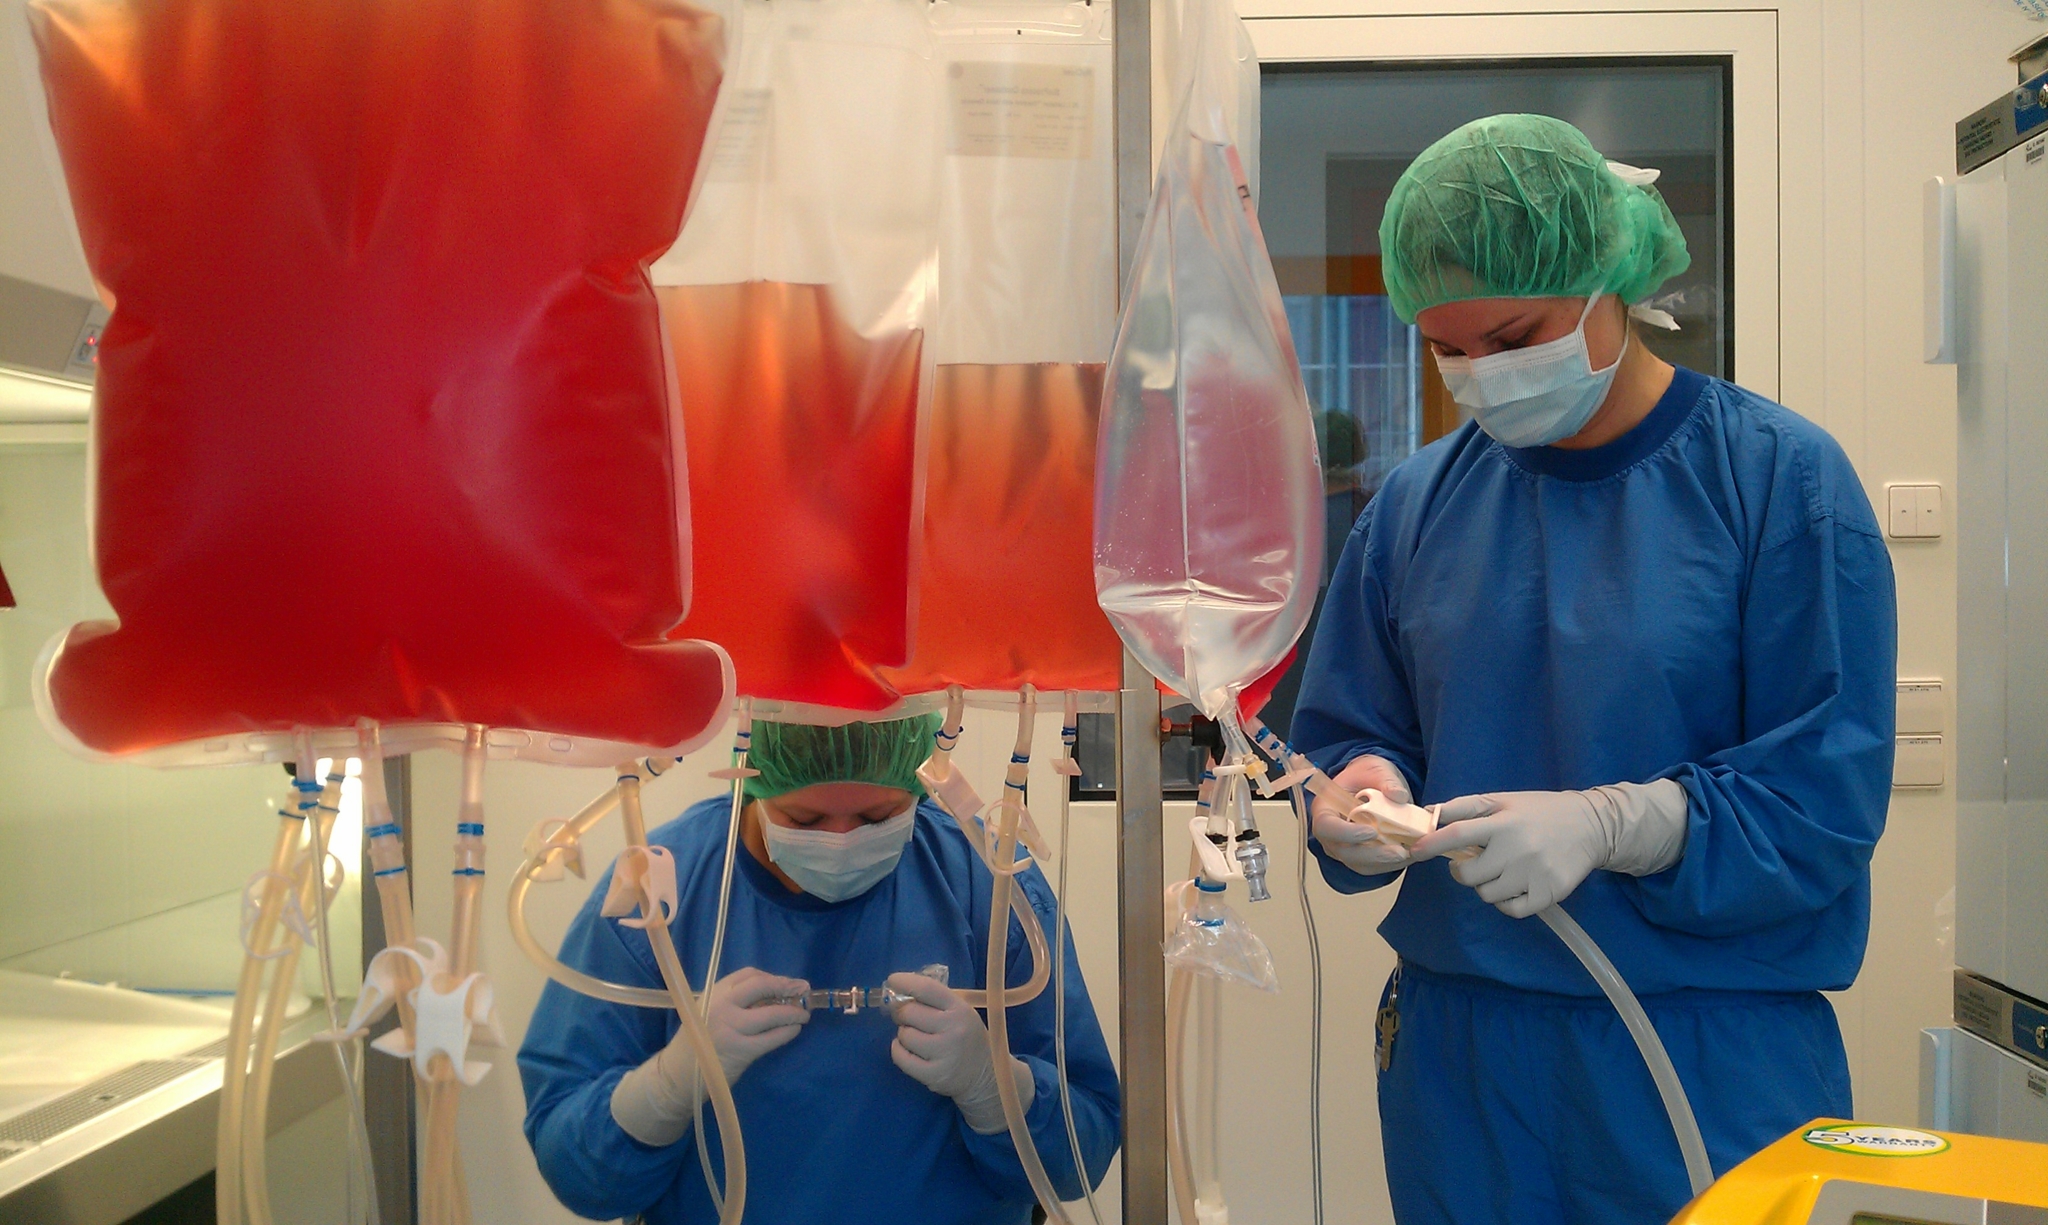 Two people in blue sterile clothing, wearing a face mask and a green hair cover, handling plastic tubes filtering the antibody solution under sterile conditions. Bags containing a red/transparent liquid are shown in the foreground.